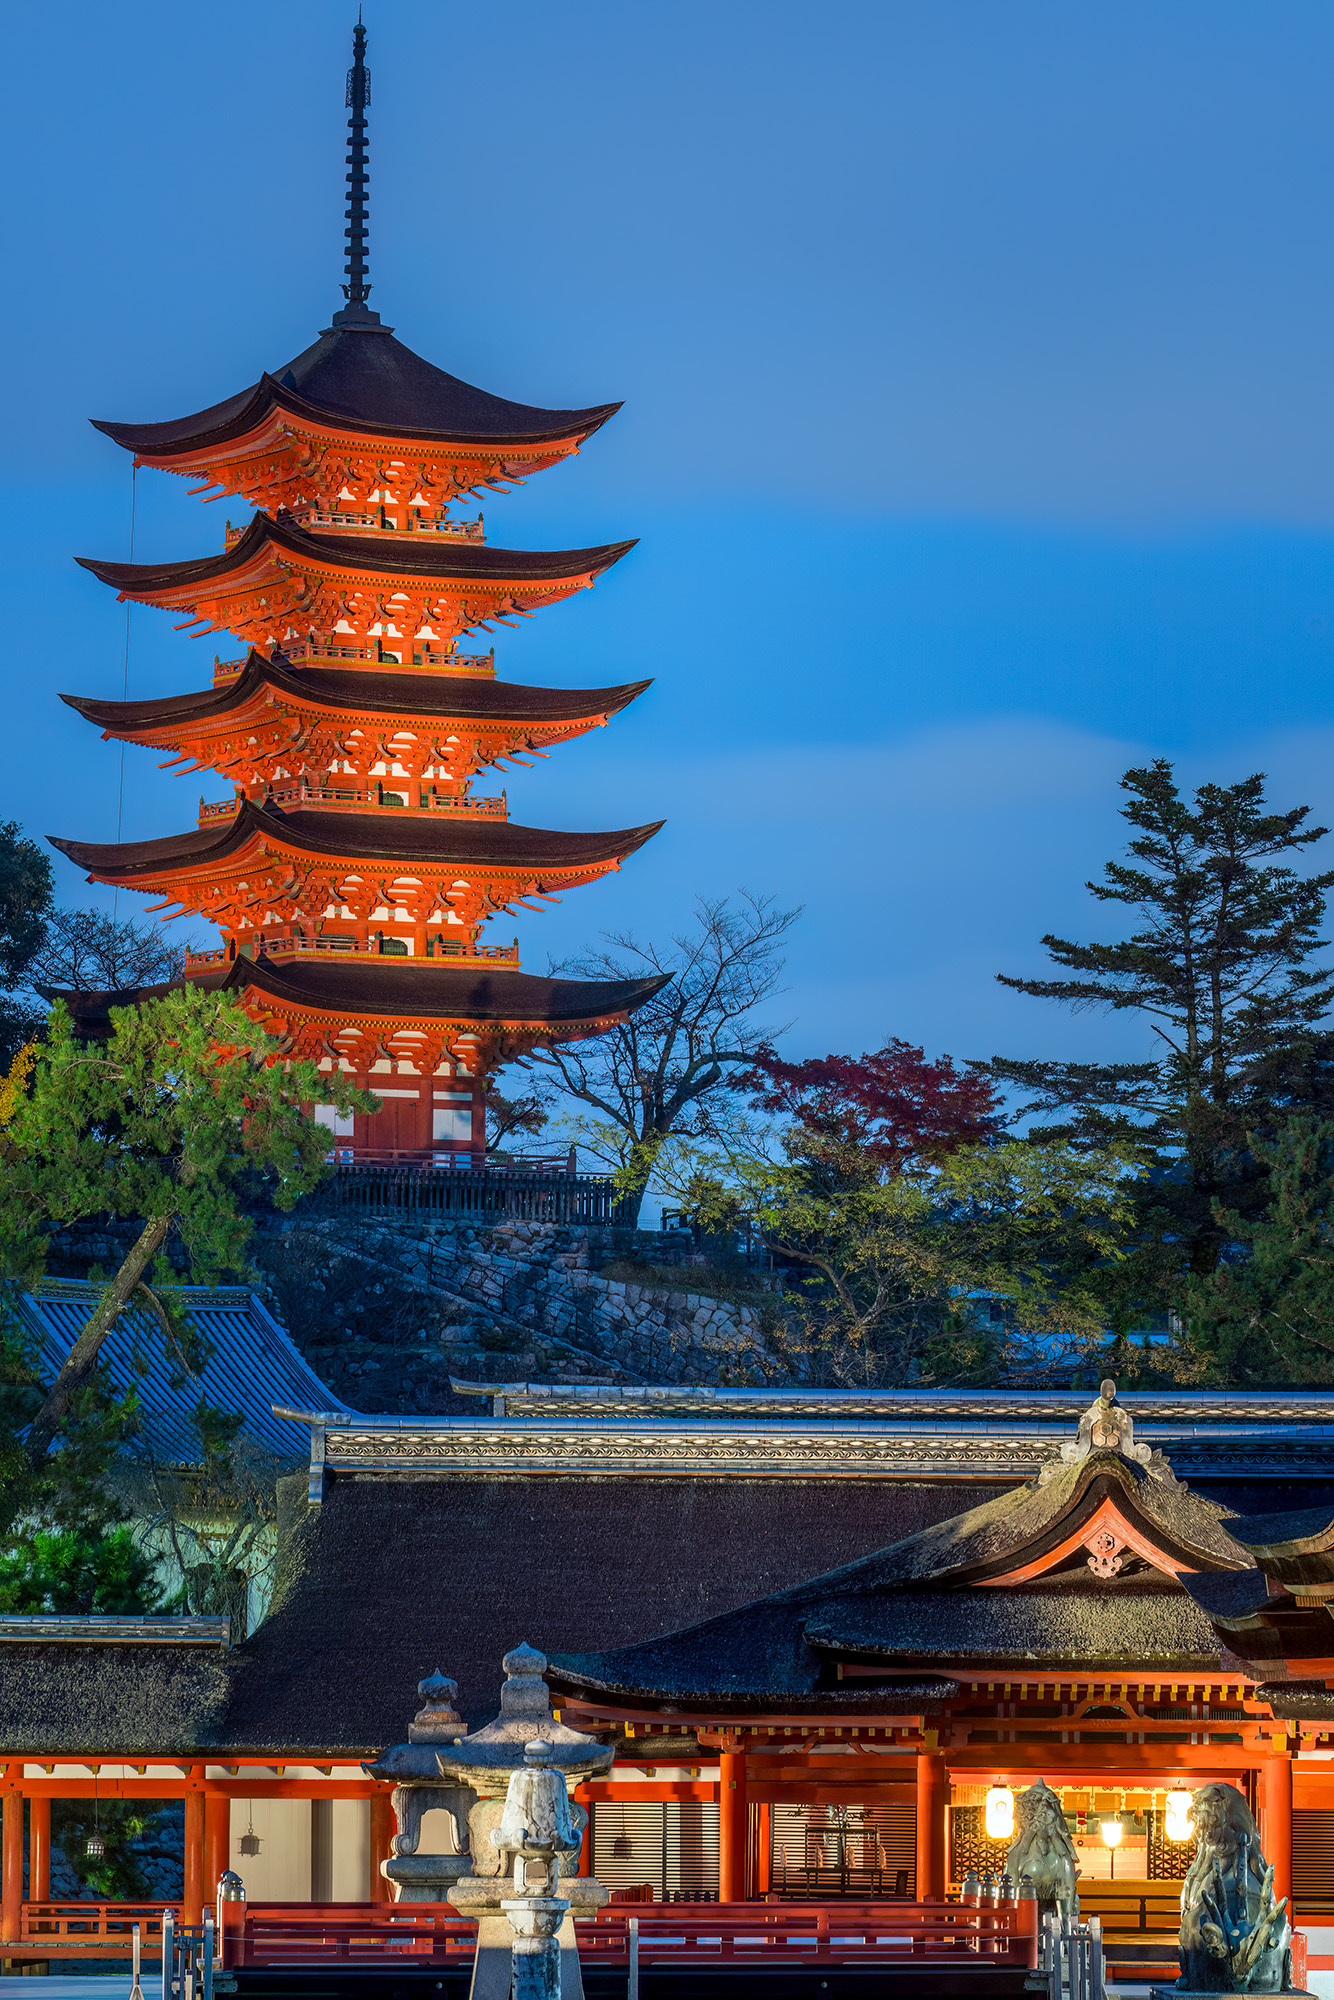 Captured during blue hour, this image showcases the Toyokuni Shrine Pagoda in all its illuminated splendor. The pagoda stands...